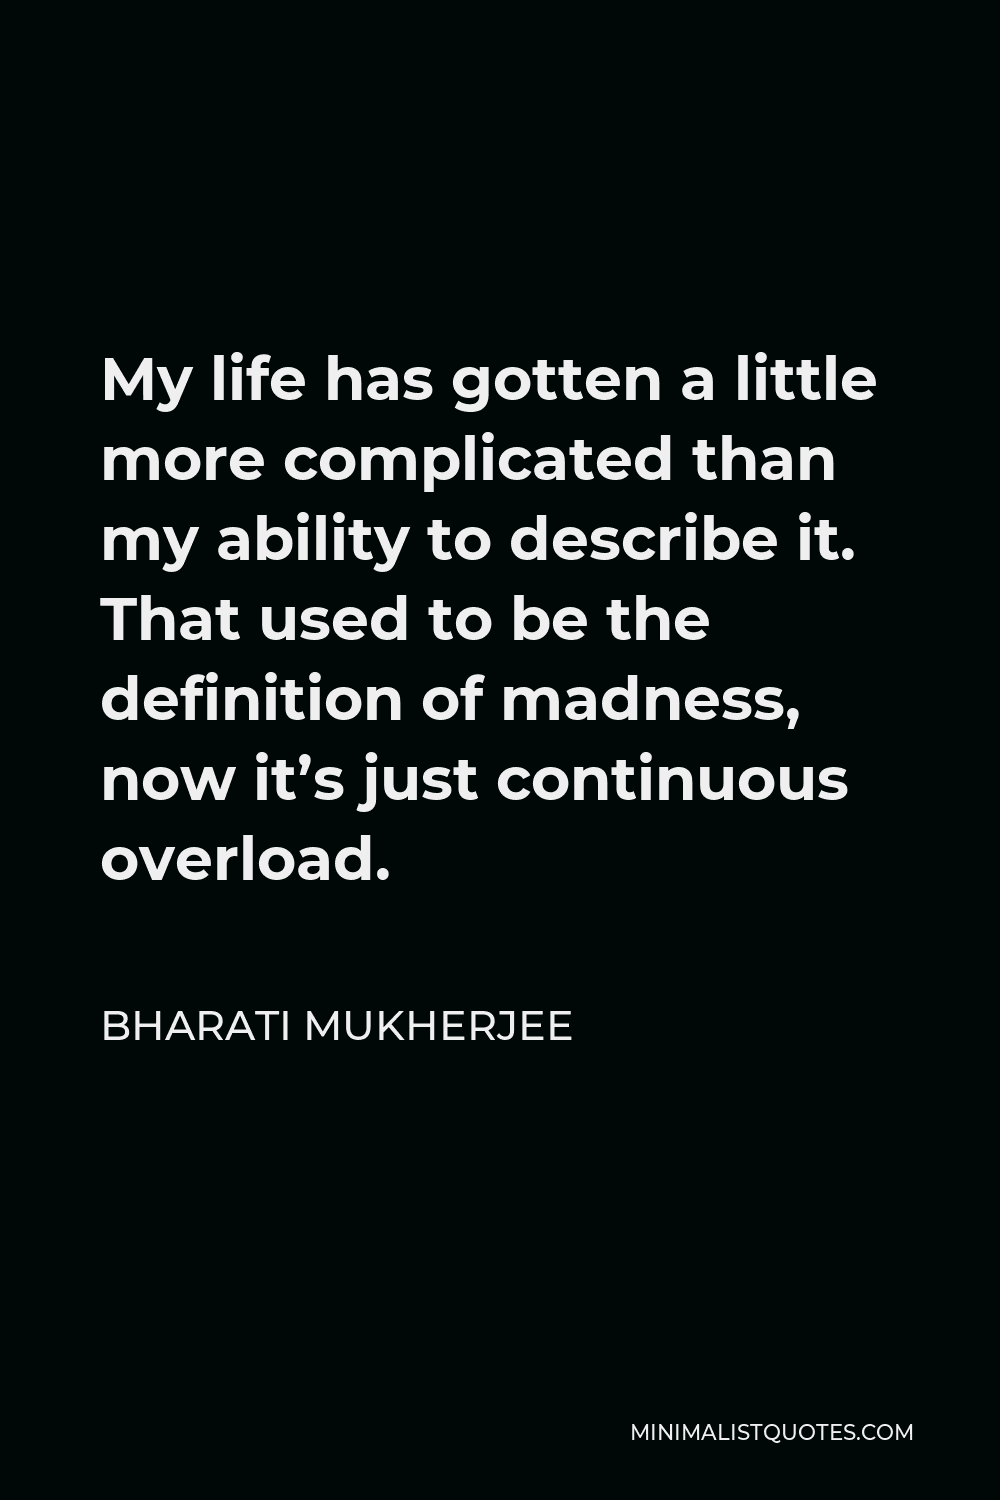 Bharati Mukherjee Quote - My life has gotten a little more complicated than my ability to describe it. That used to be the definition of madness, now it’s just continuous overload.